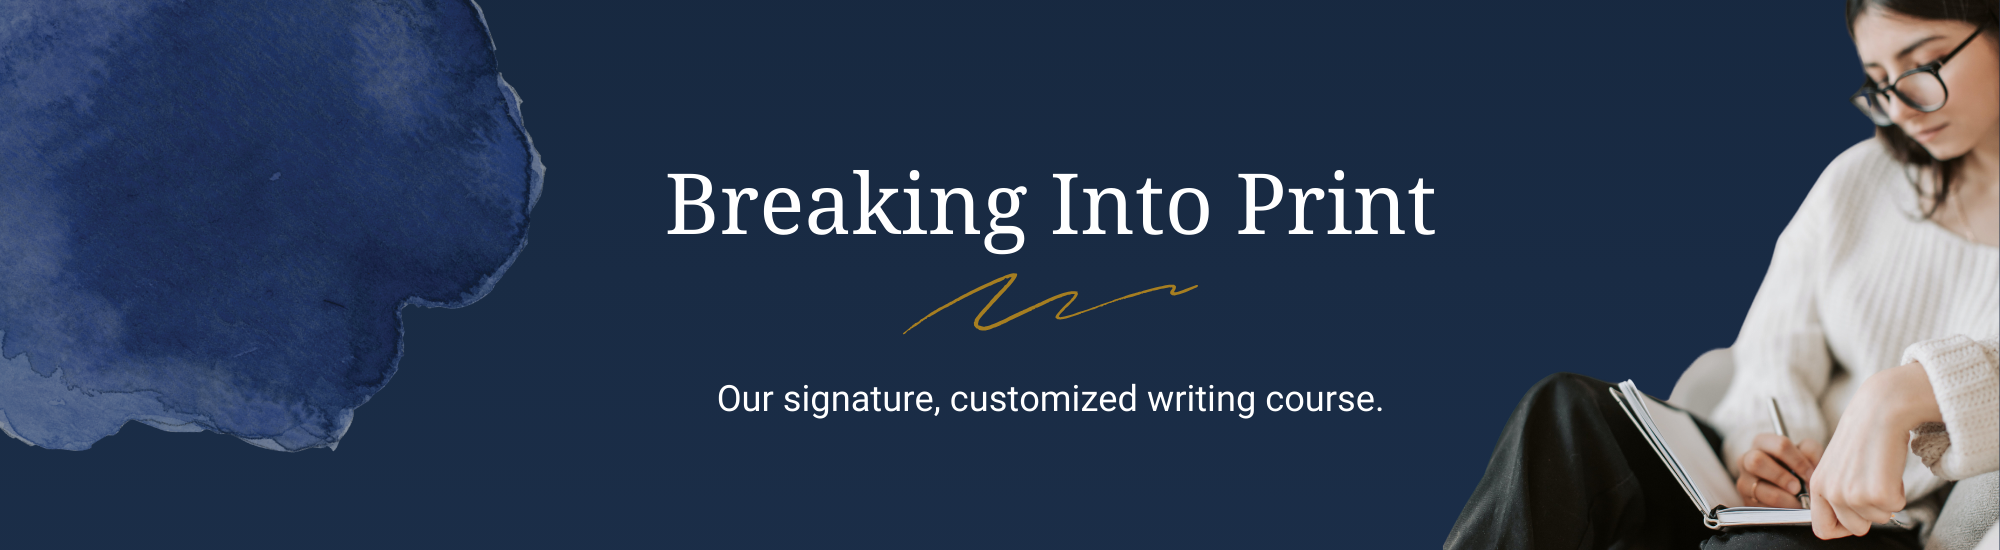 Breaking into print. Our signature, customized writing course.